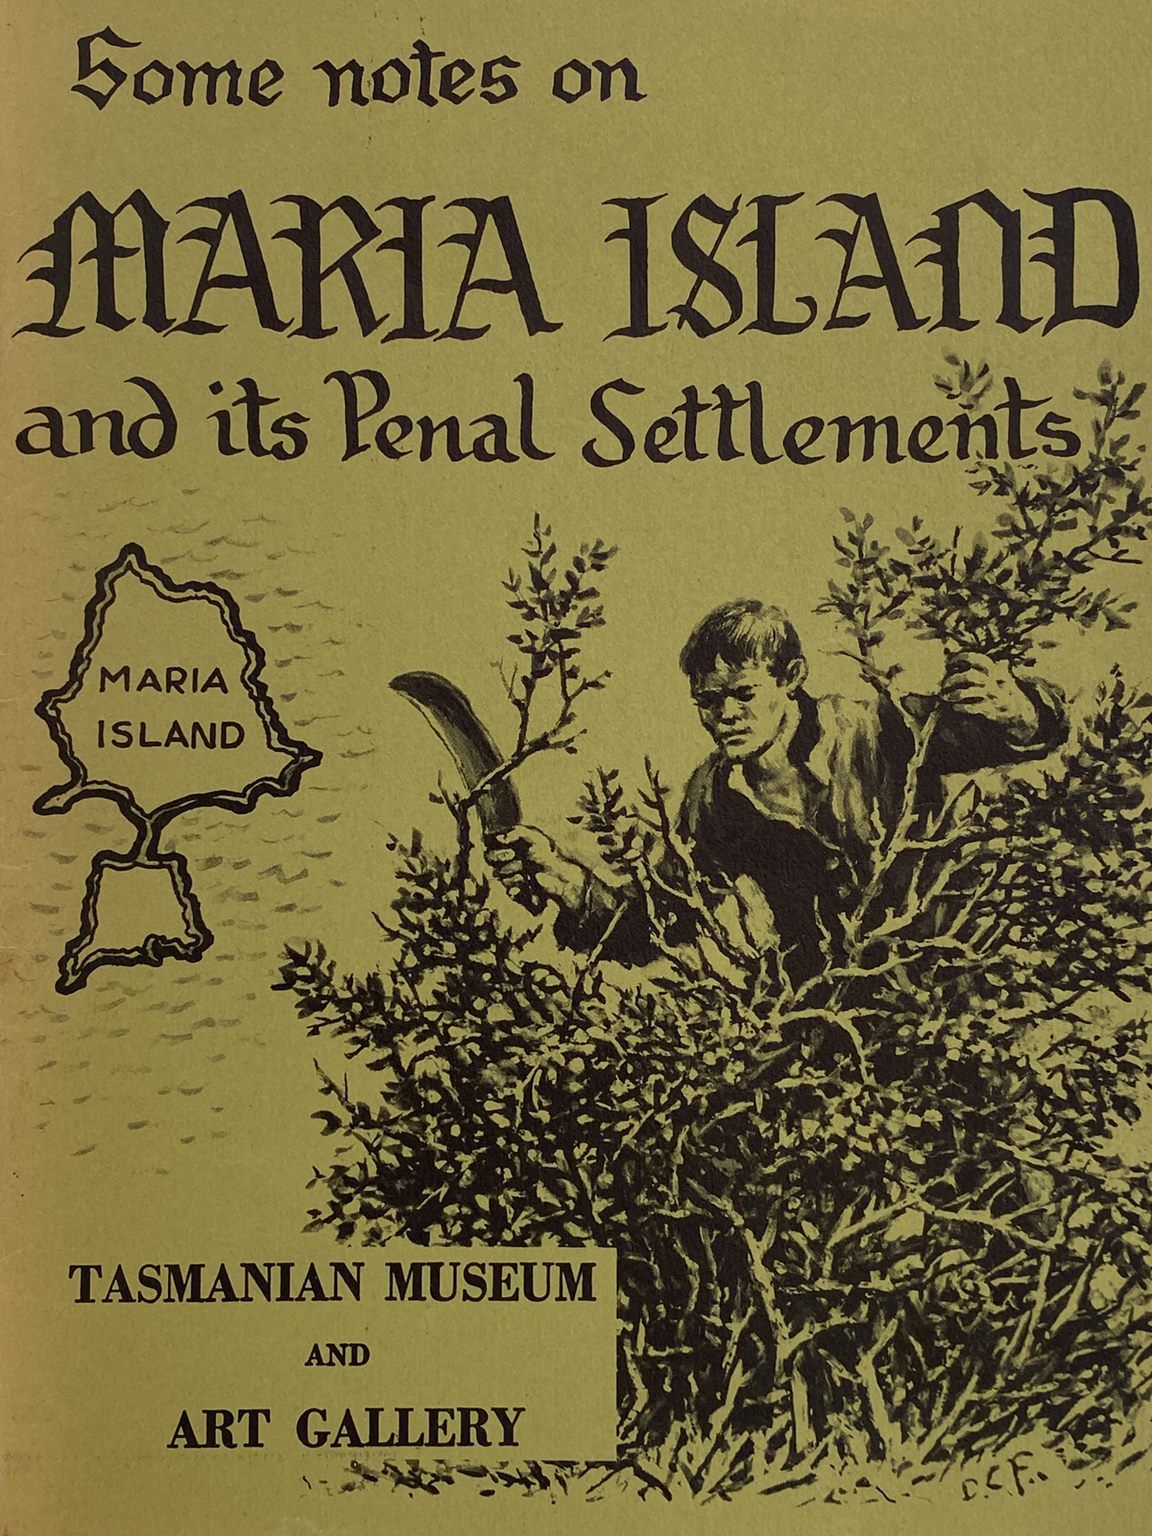 MARIA ISLAND: Some notes on its Penal Settlements